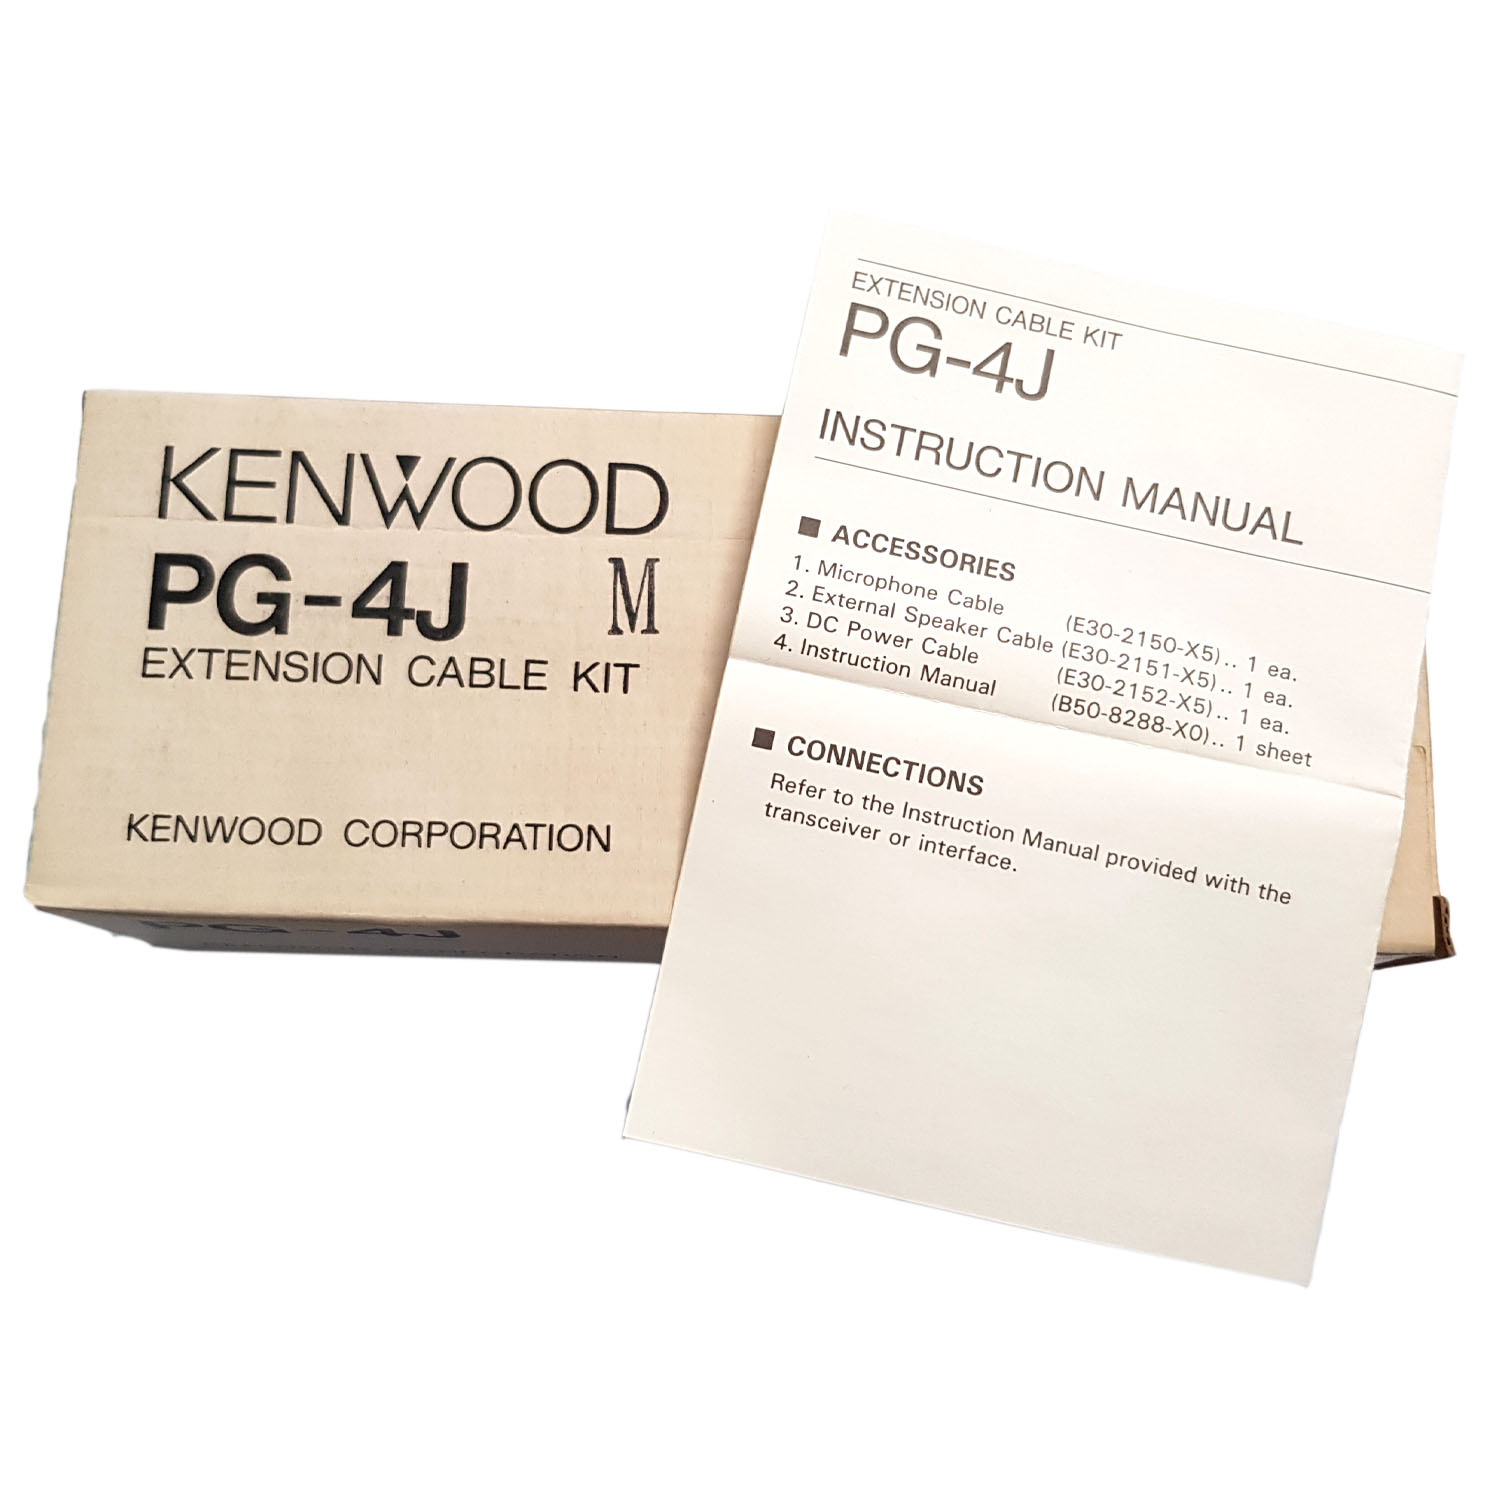 Kenwood PG-4J Extension Cable Kit